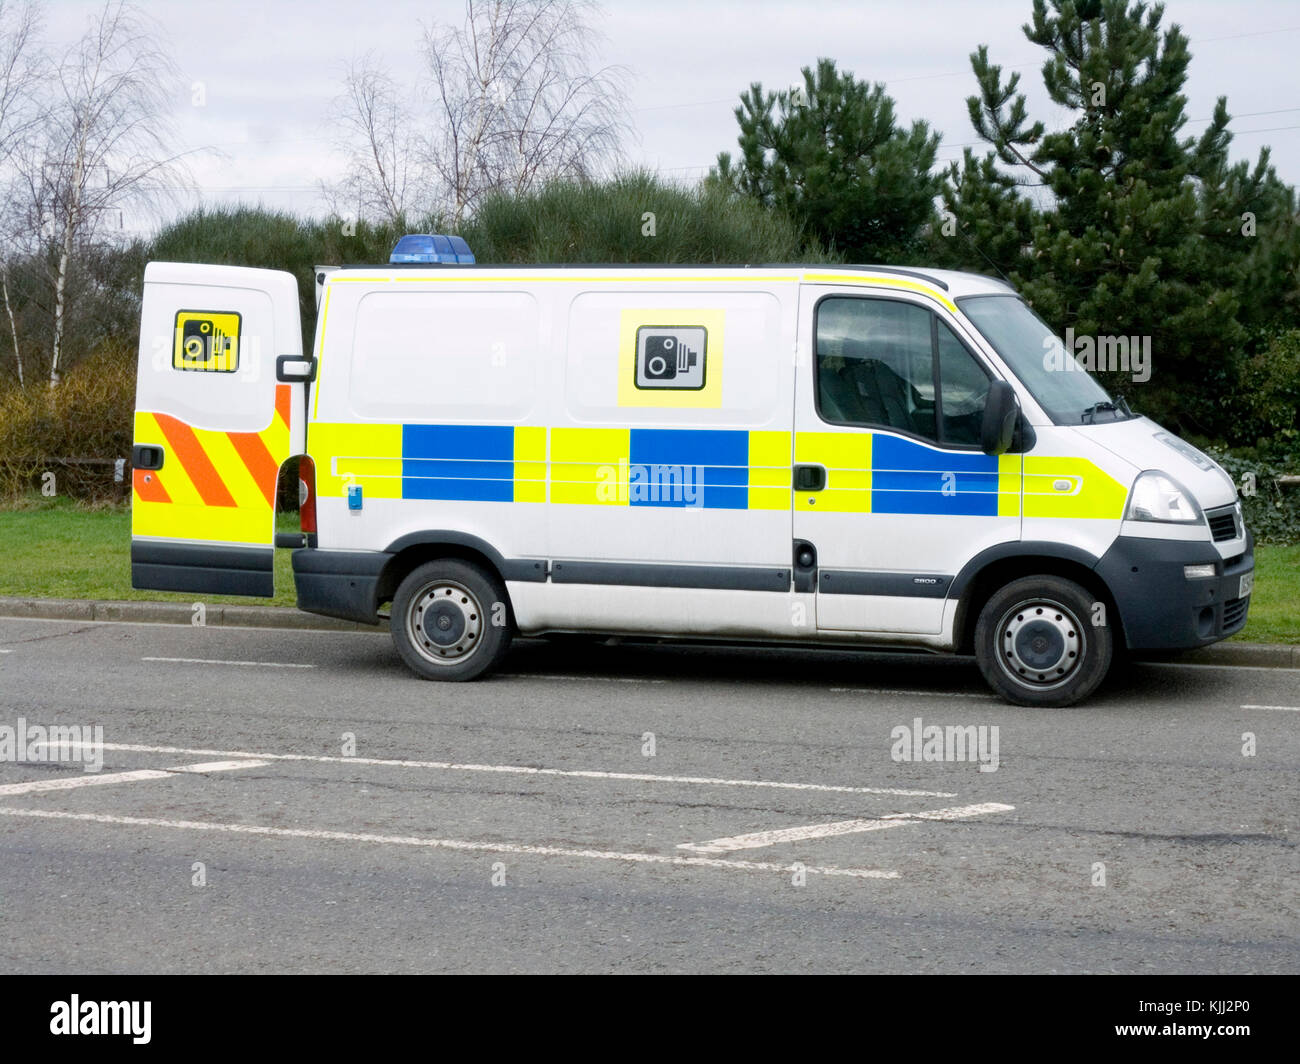 Police Speed Trap Stock Photo